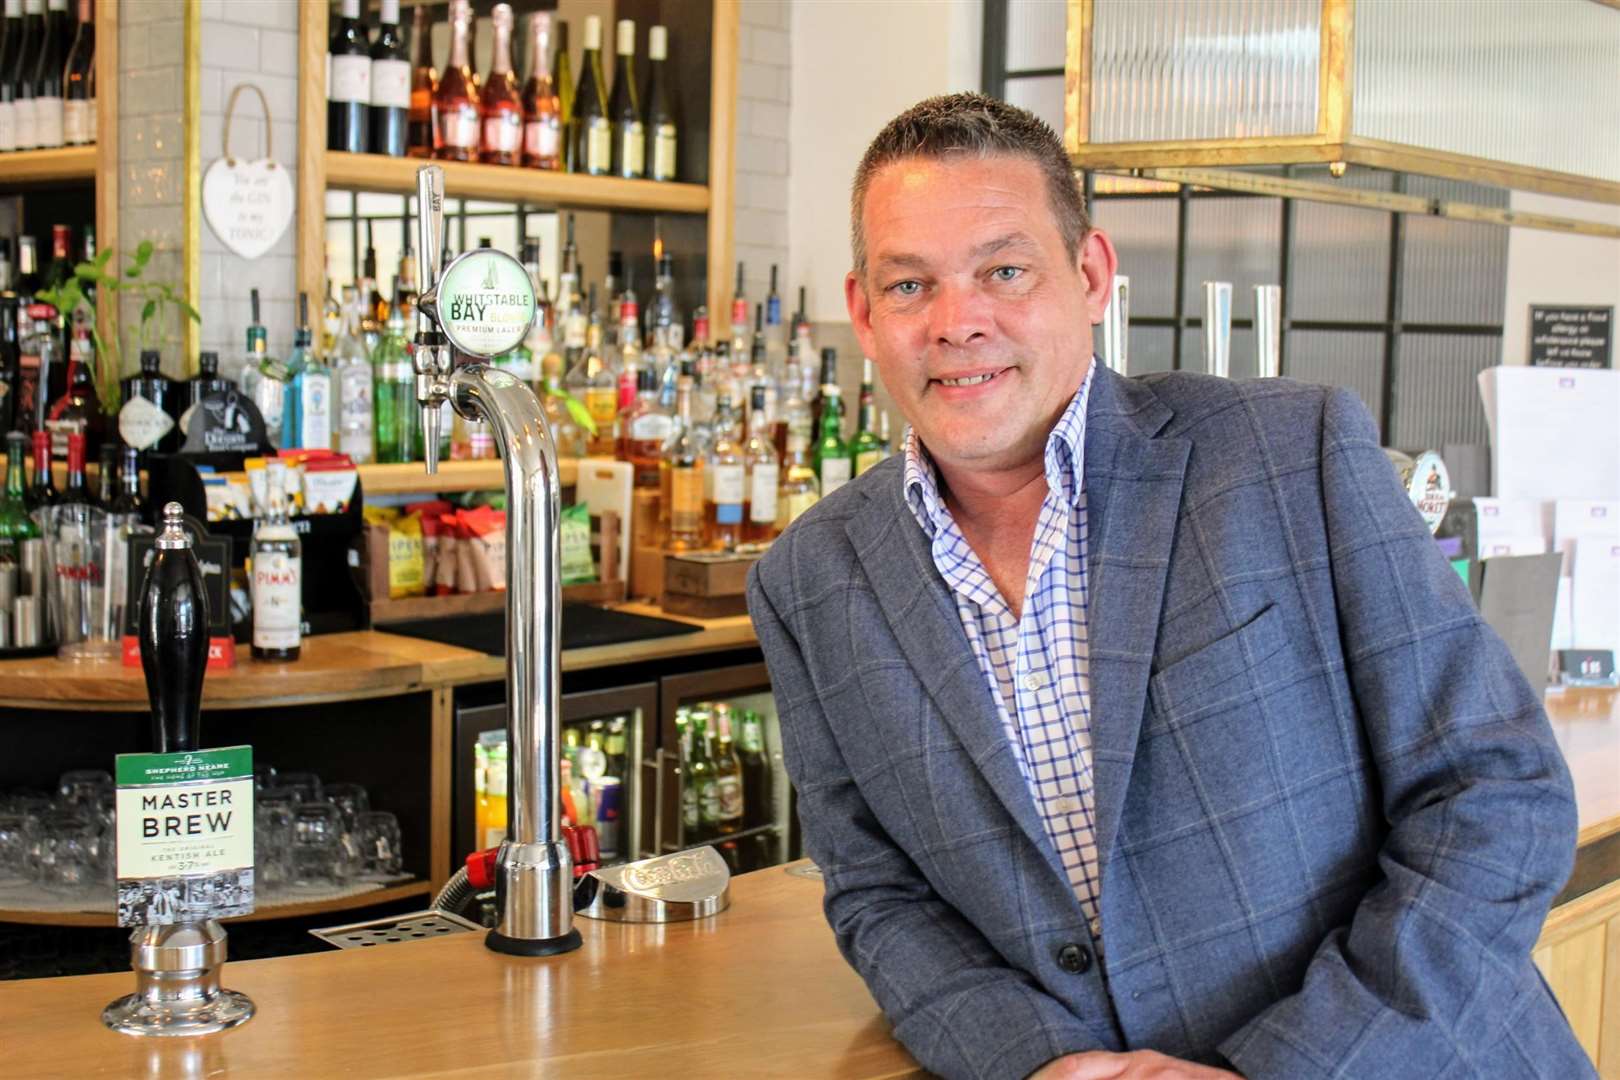 Steve Collins, manager of the Royal Wells Hotel in Tunbridge Wells (2868065)